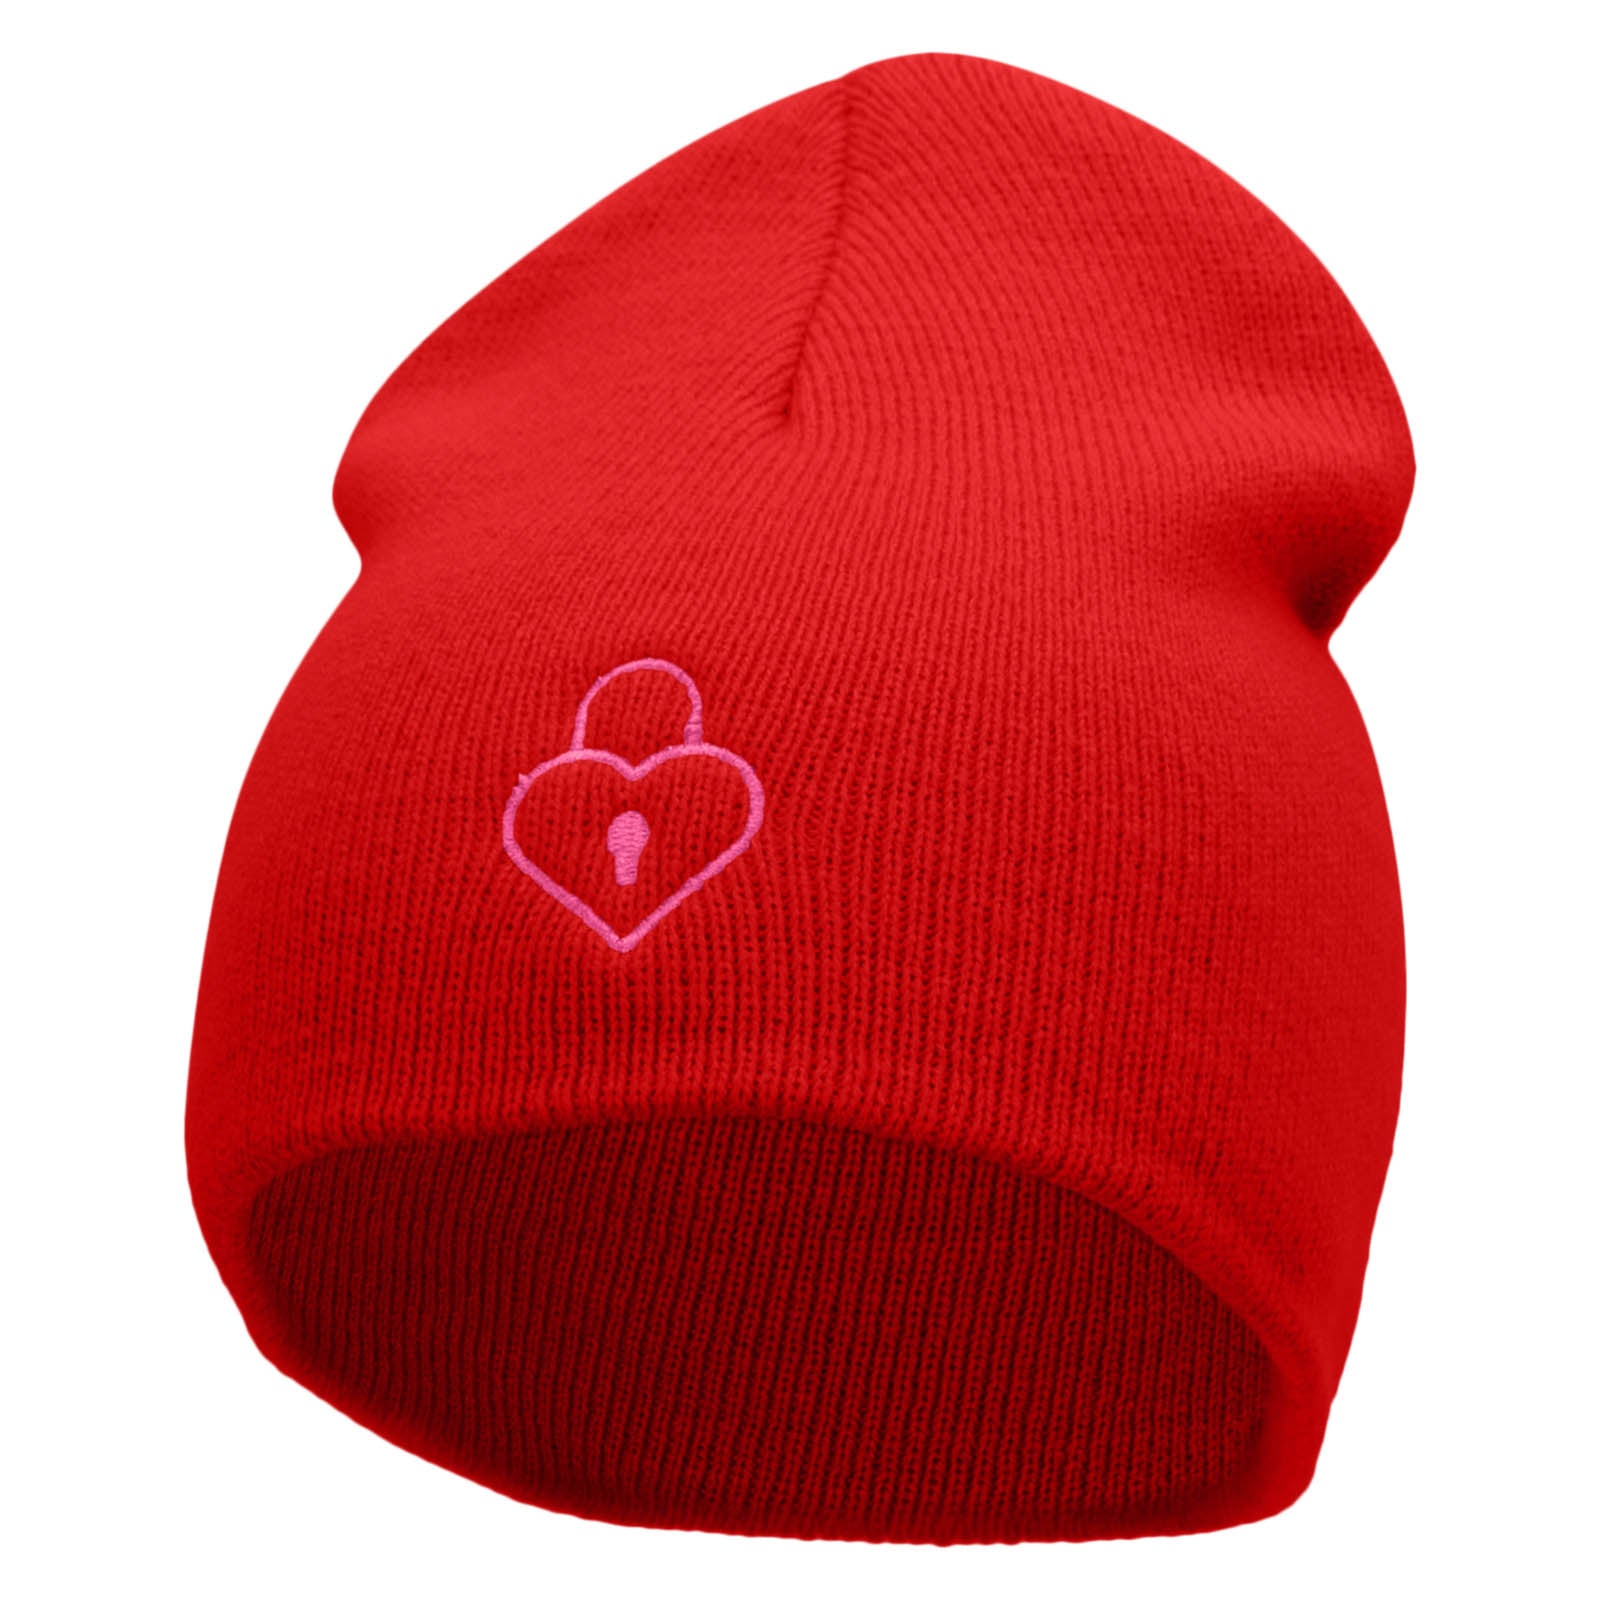 Lock Of Love Embroidered 8 Inch Short Beanie Made in USA - Red OSFM